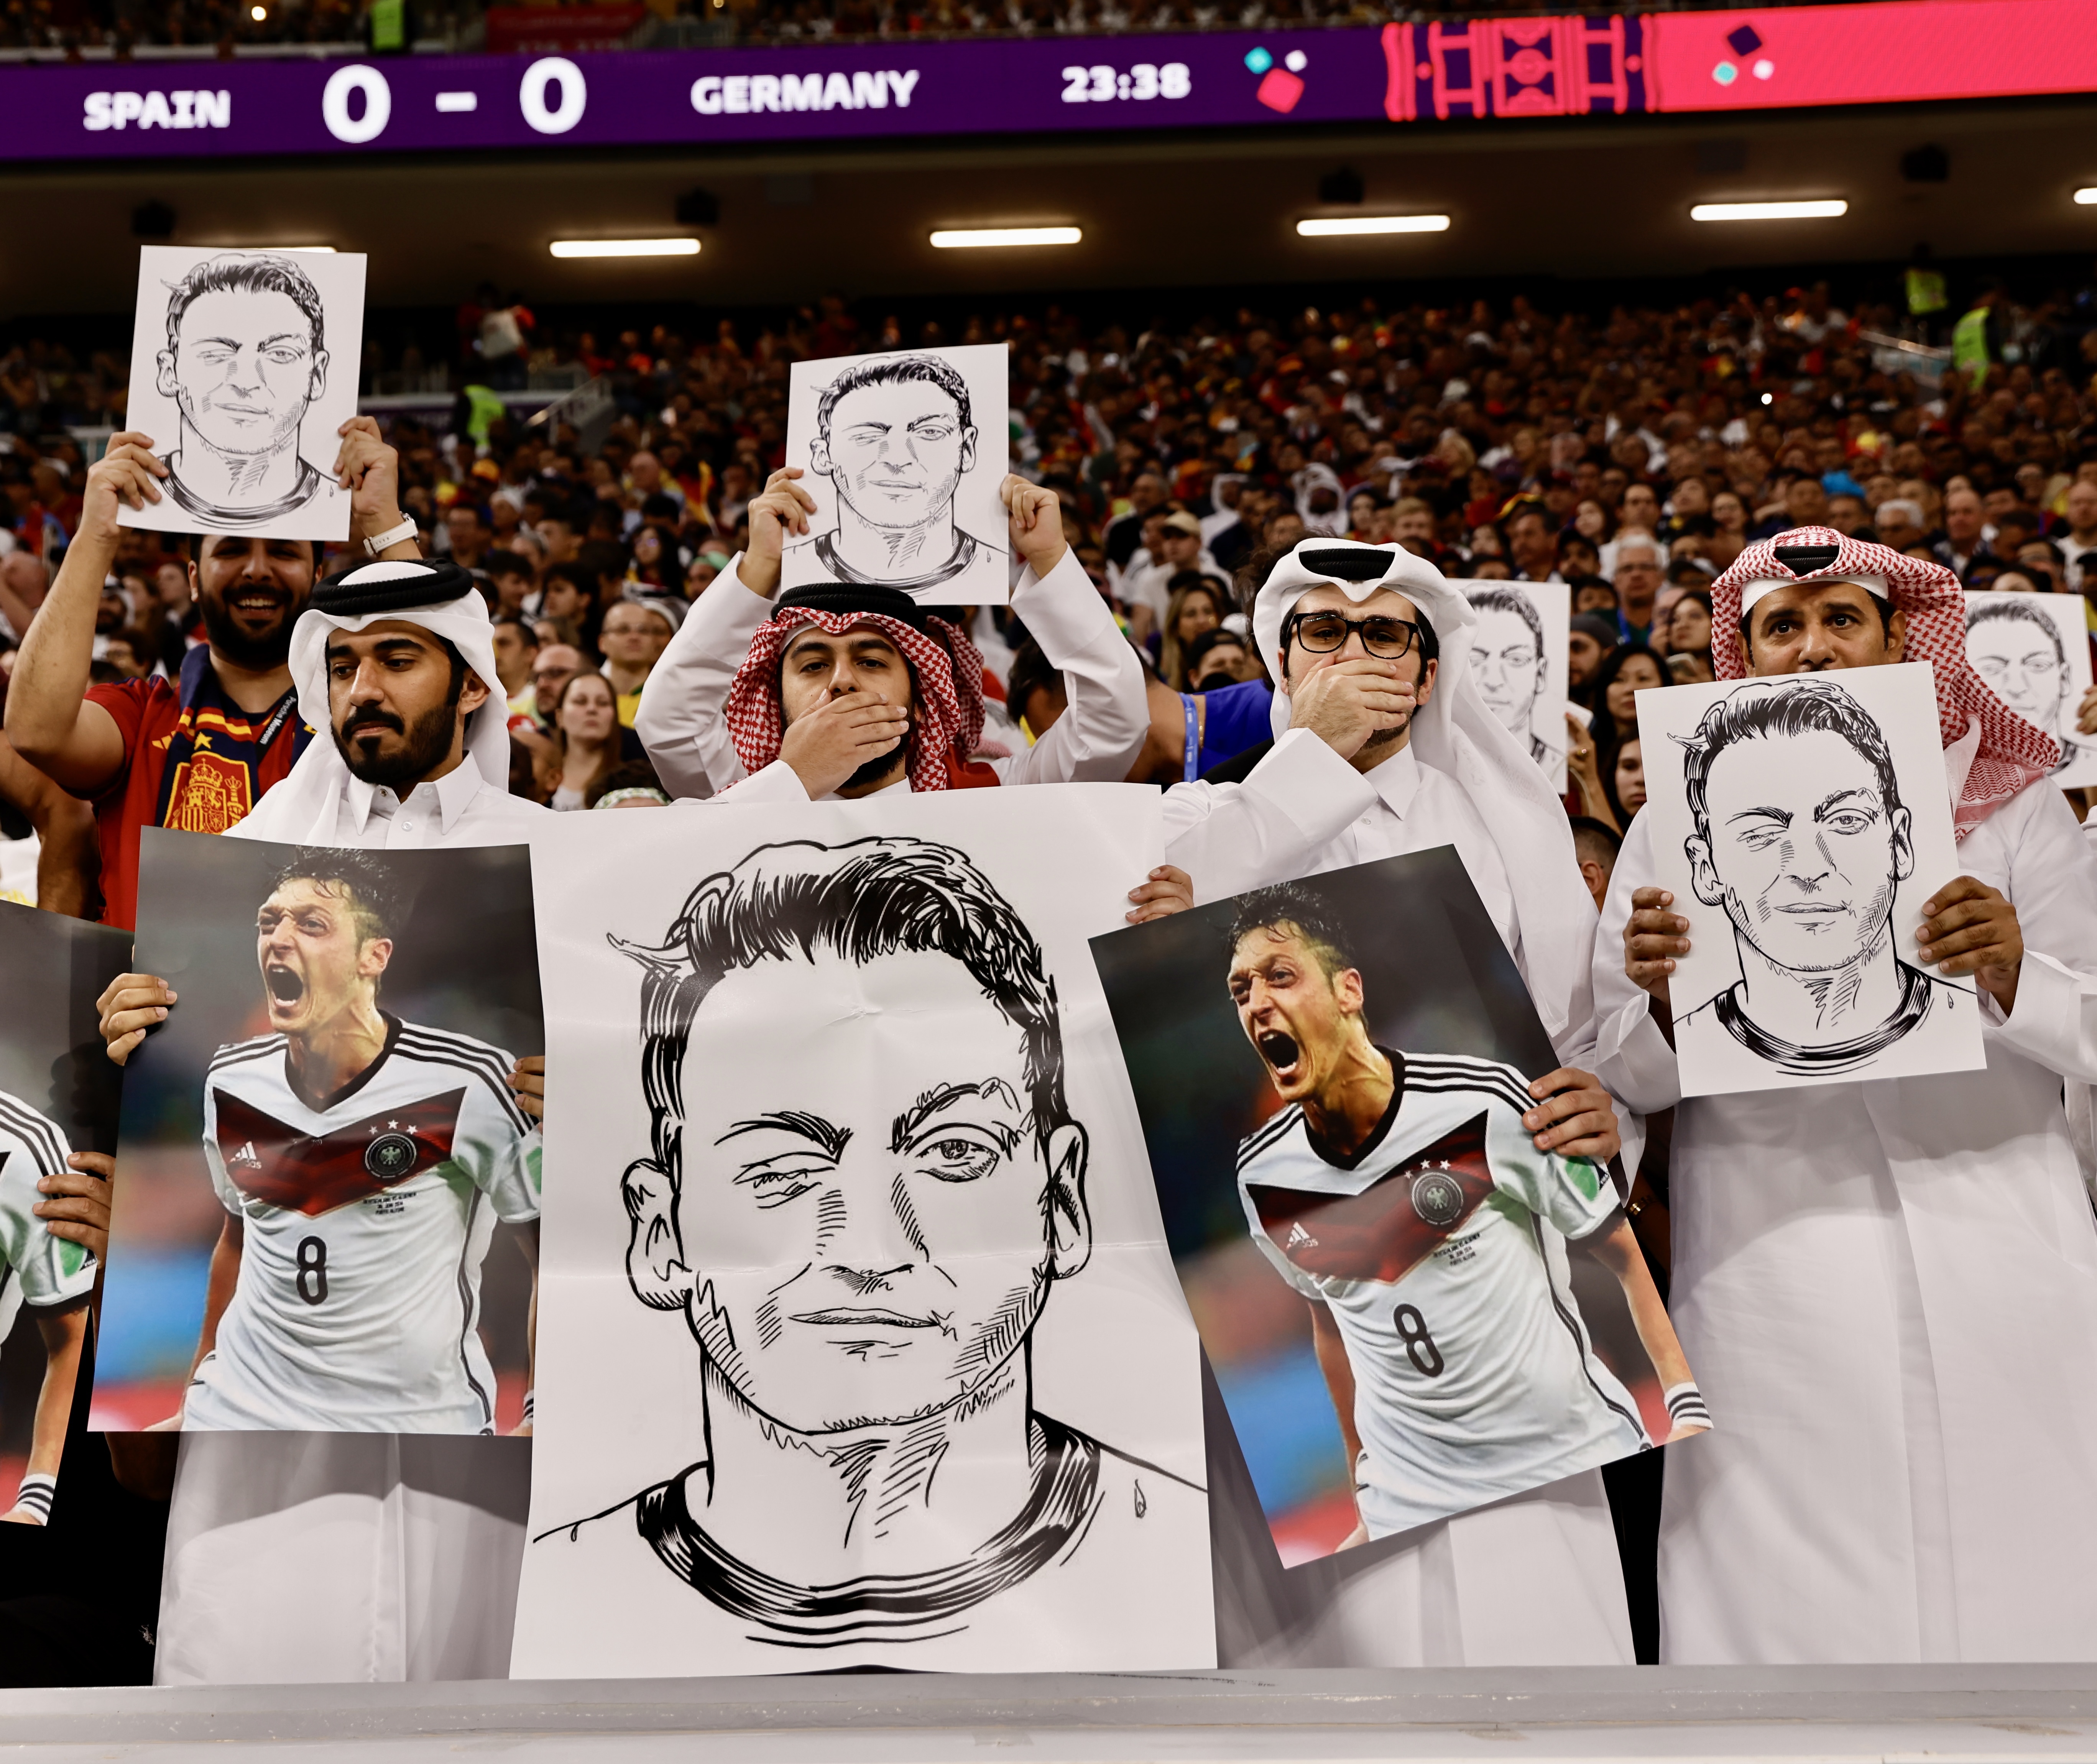 World Cup Qatari fans take aim at Germany with Ozil protest